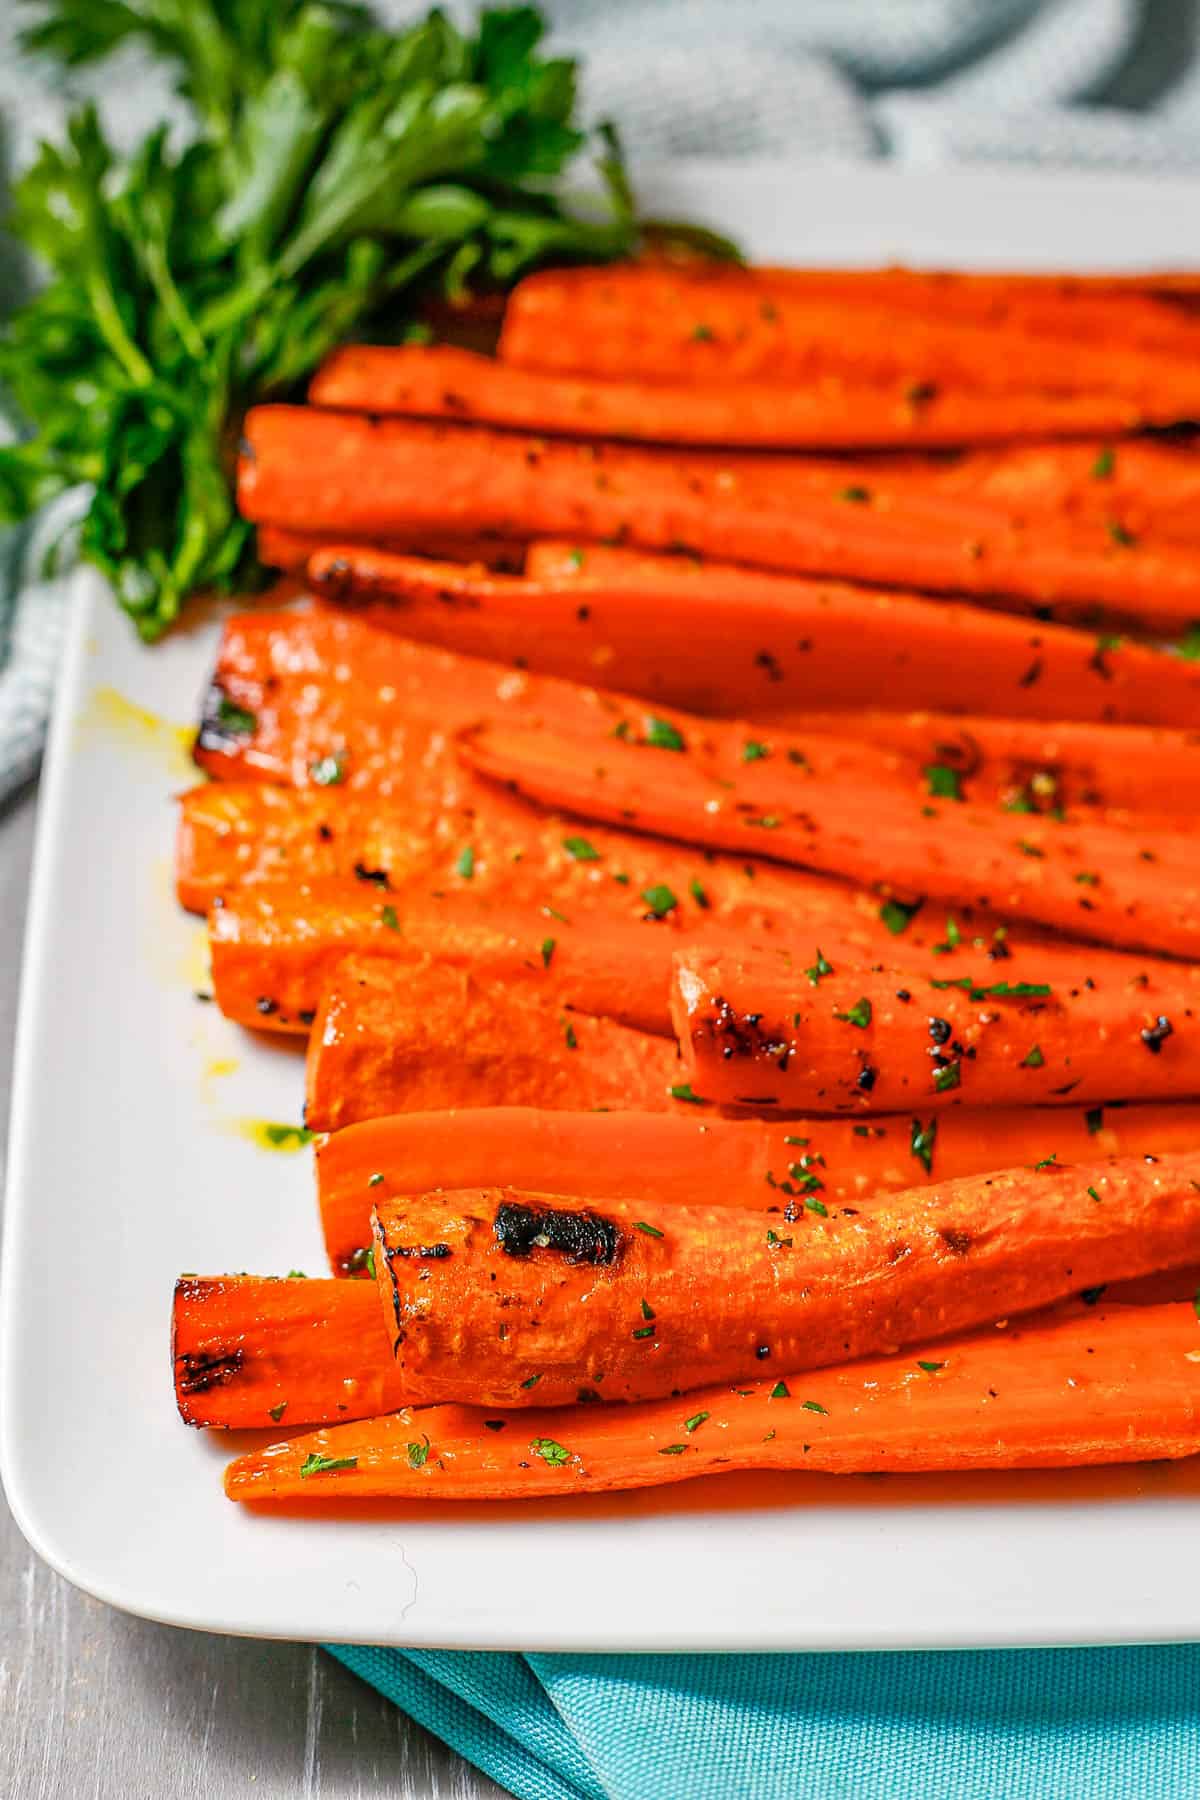 Roasted carrots served on a white rectangular plate with a bunch of parsley as garnish.